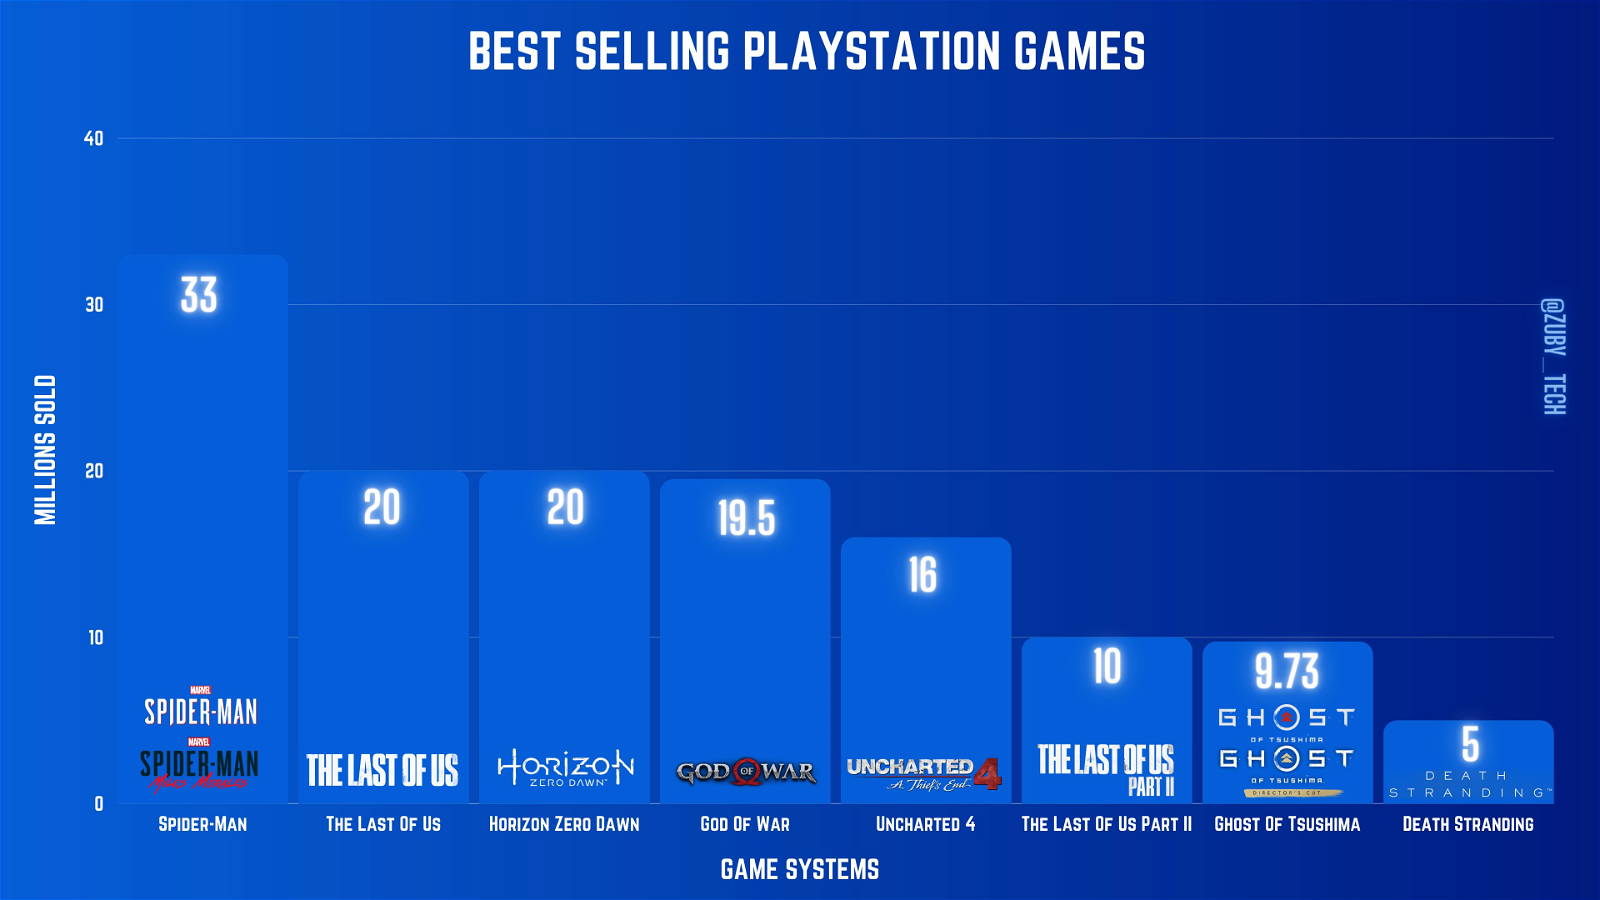 PlayStation Sales figures for Exclusive Games